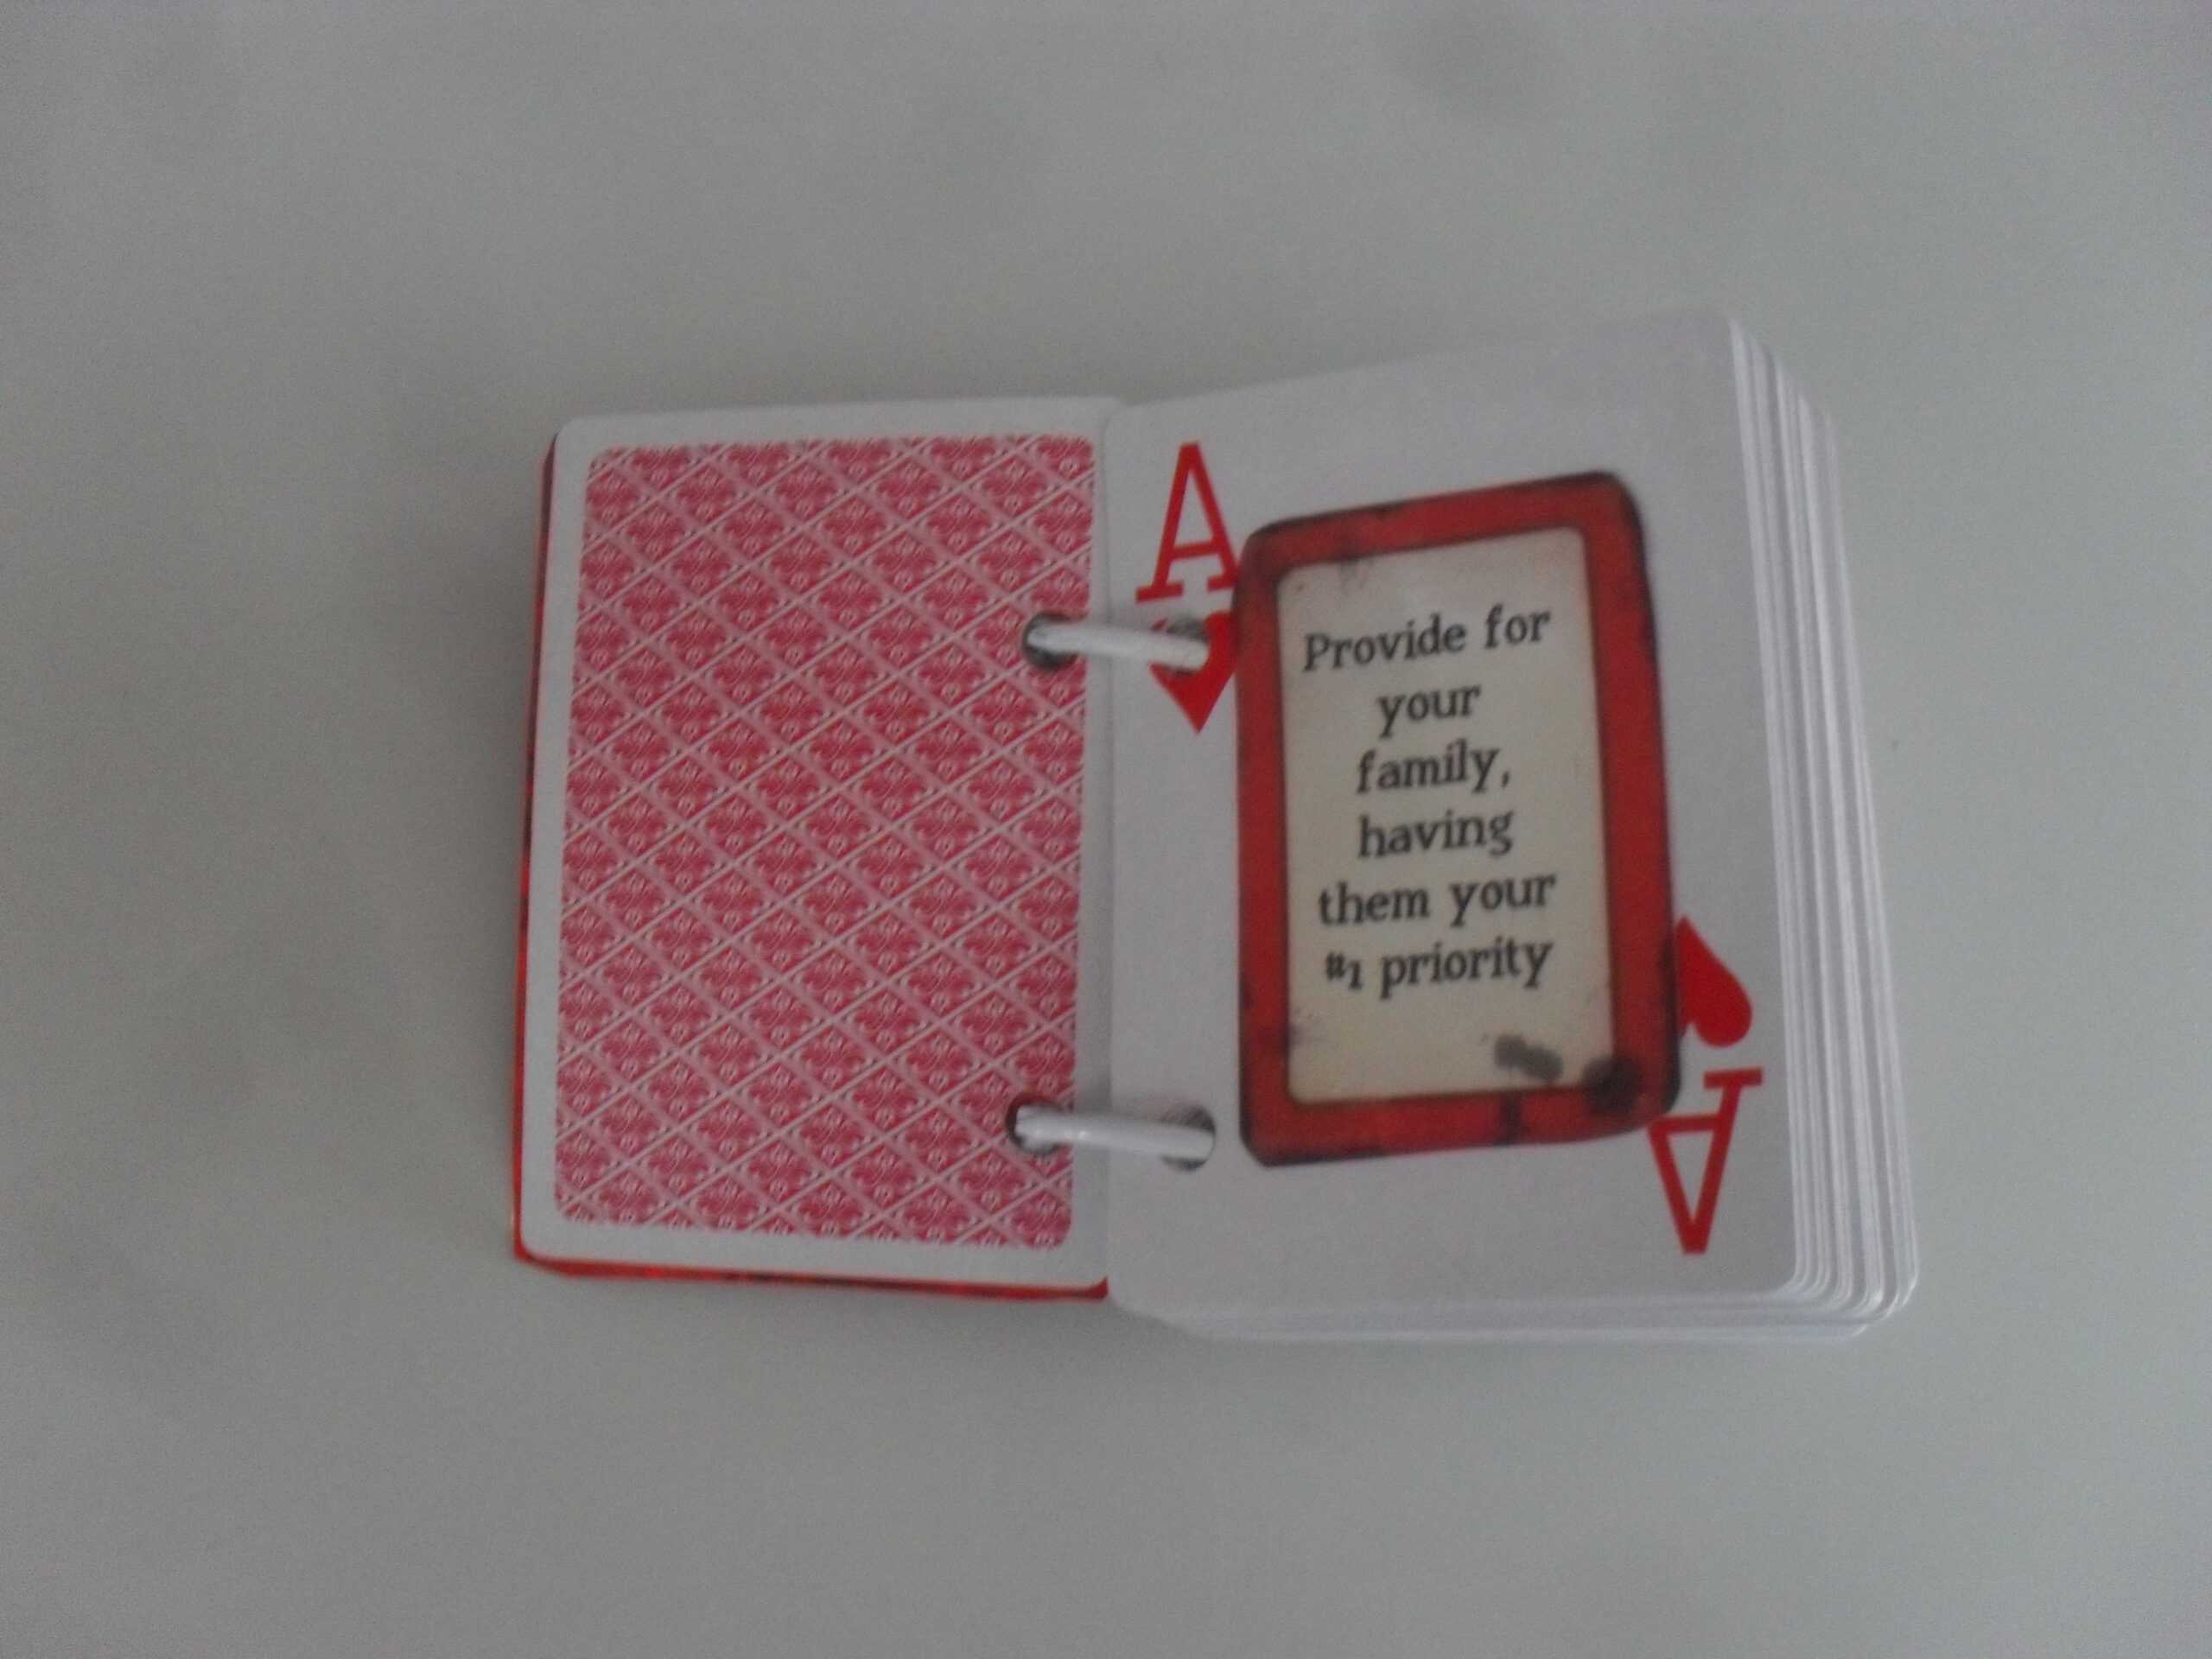 52 Reasons Why I Love You* | Tasteful Space Within 52 Things I Love About You Deck Of Cards Template